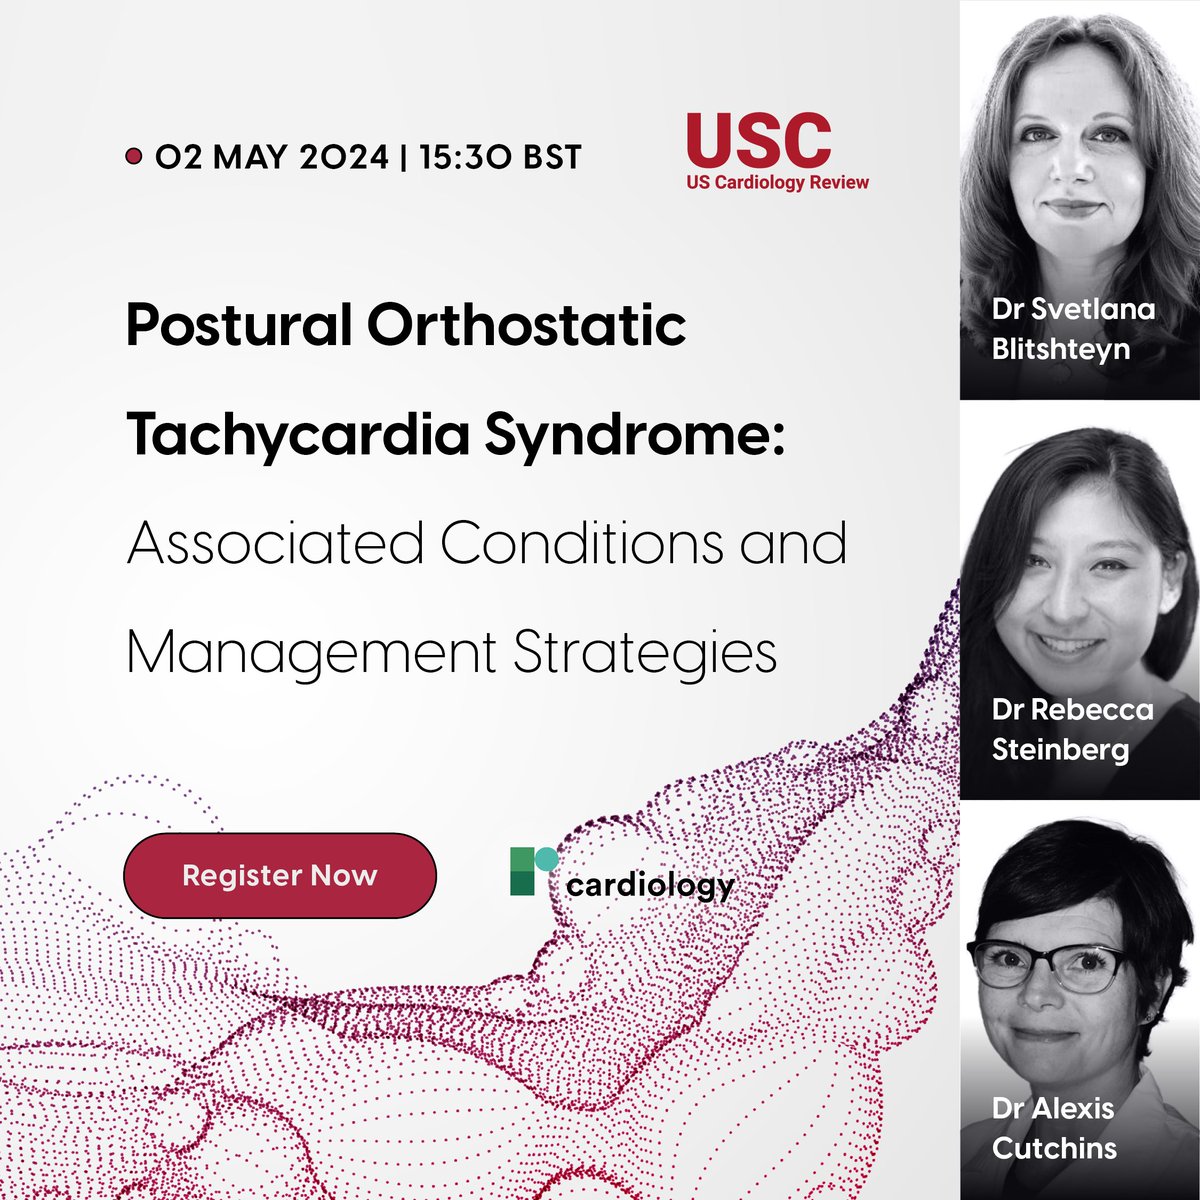 🩺Attention cardiologists, neurologists and other HCPs! Join a panel of expert authors this week at our upcoming broadcast on Postural Orthostatic Tachycardia Syndrome and future care avenues. 📅 May 2, 15:30 BST/16:30 CEST Register today👉 ow.ly/CTqI50Rr9pb #POTS #MedEd